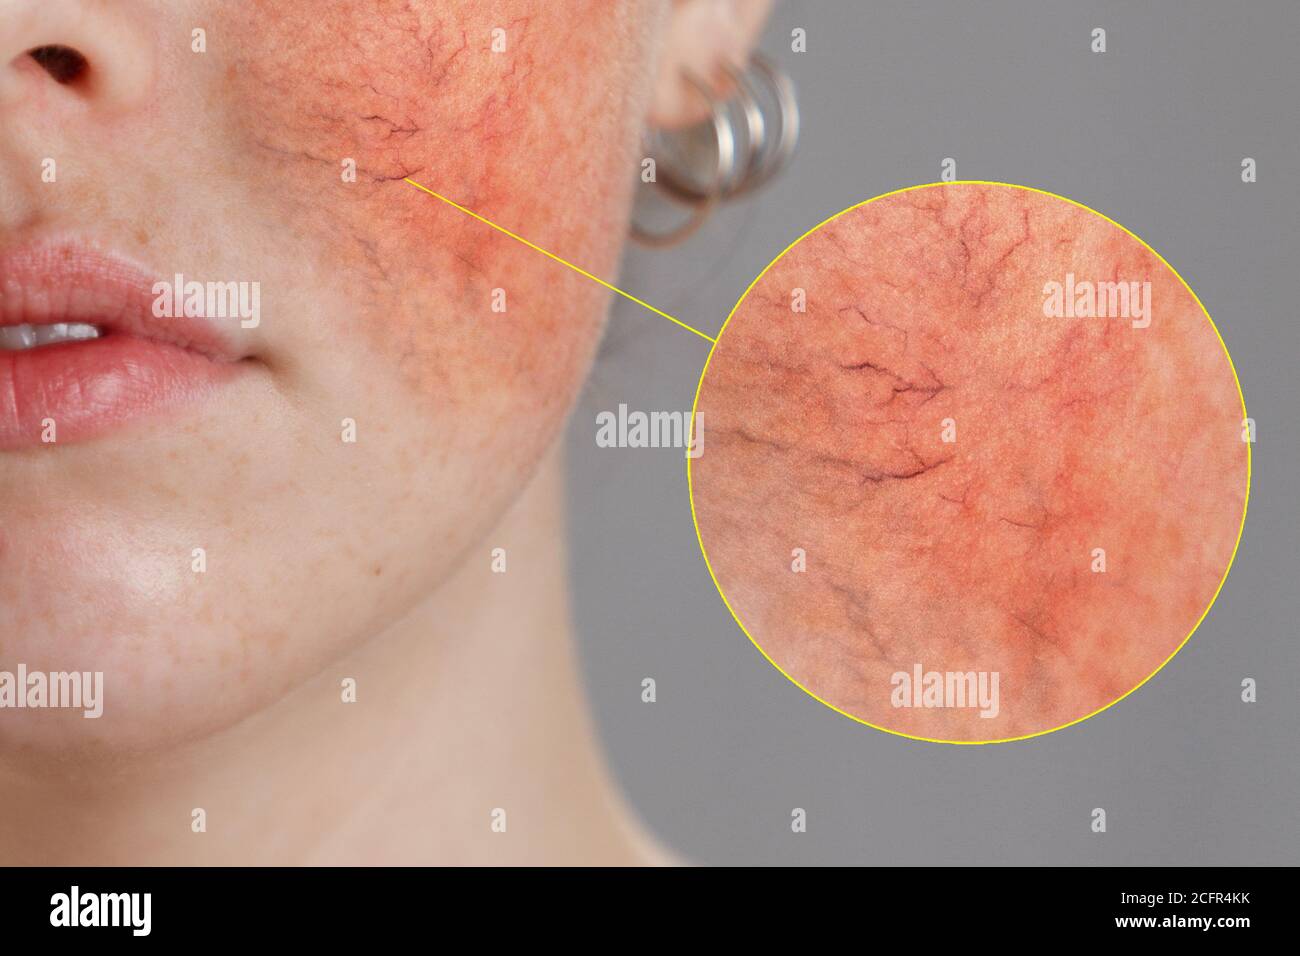 Cosmetology and rosacea. Close-up portrait of female face, cheeks with severe inflammation, blood vessels and rosacea. Stock Photo